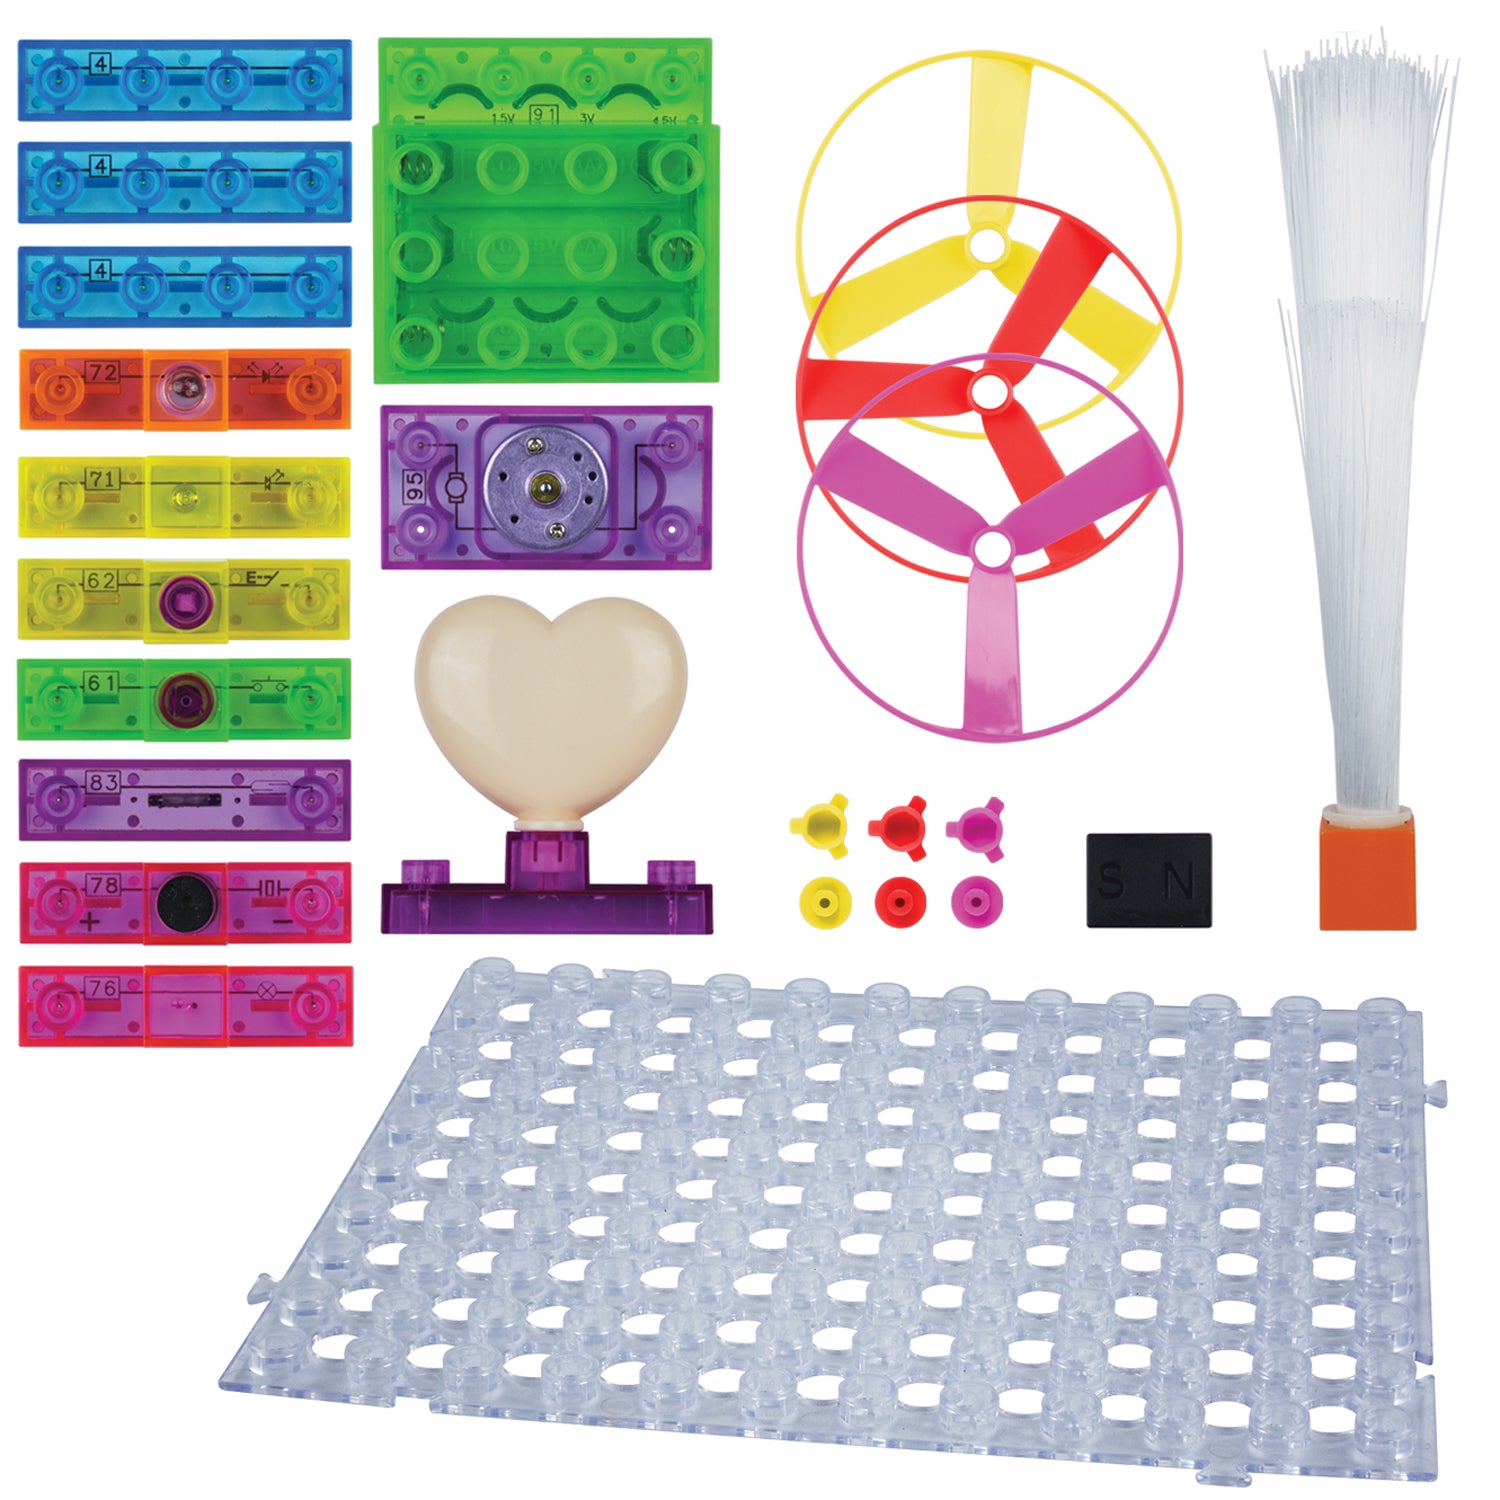 Circuit Blox™ Individual Set, 59 projects - A1 School Supplies